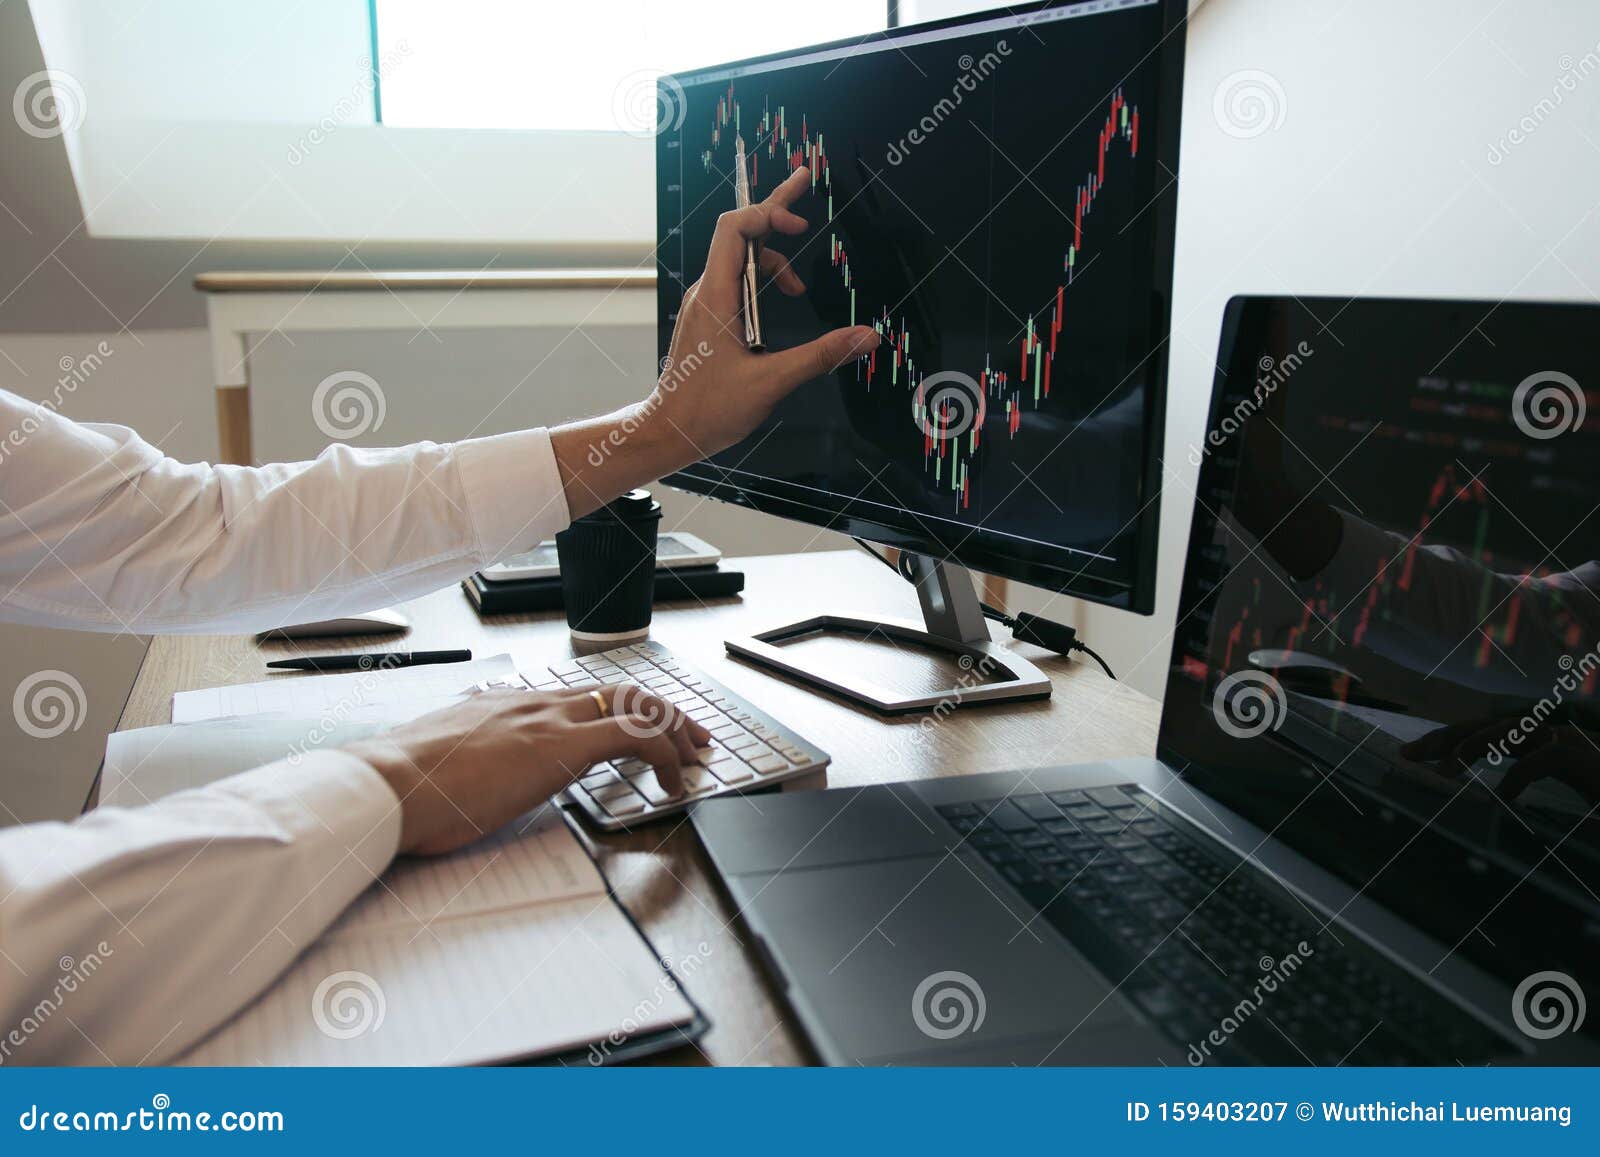 close up of hand investors are pointing to laptop computer that have investment information stock markets and partners taking